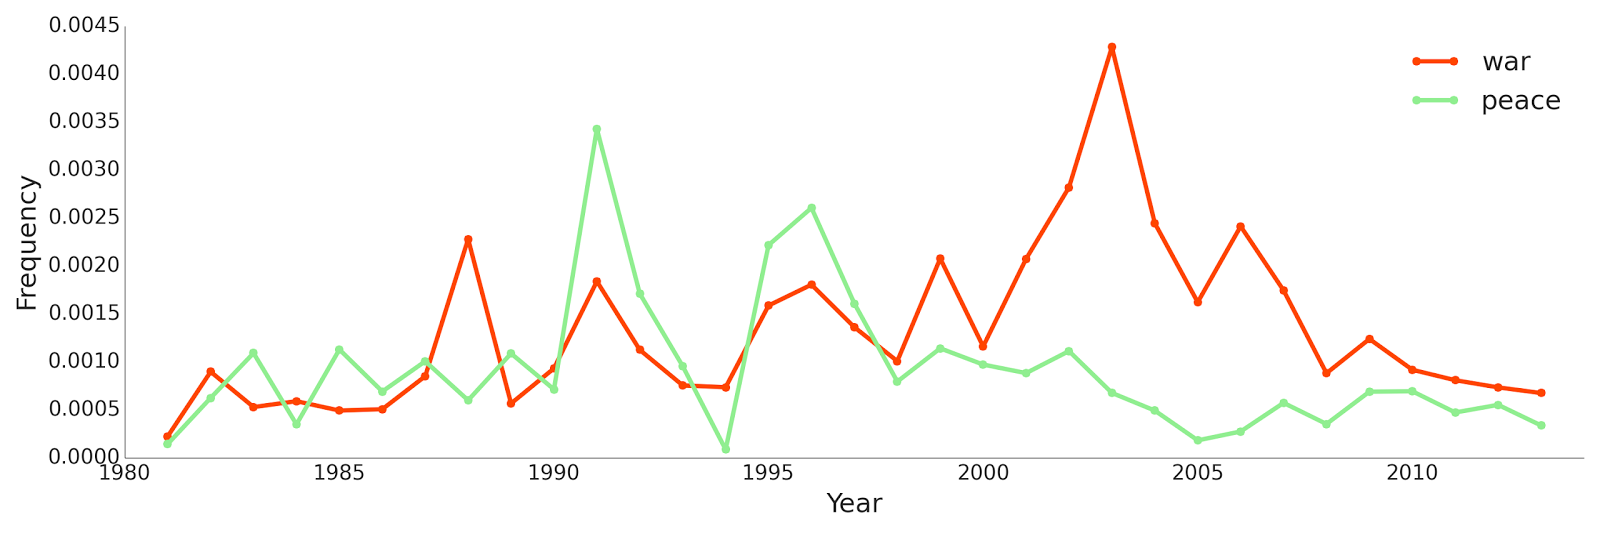 2013-11-03-war-peace-by-frequency-over-time.png